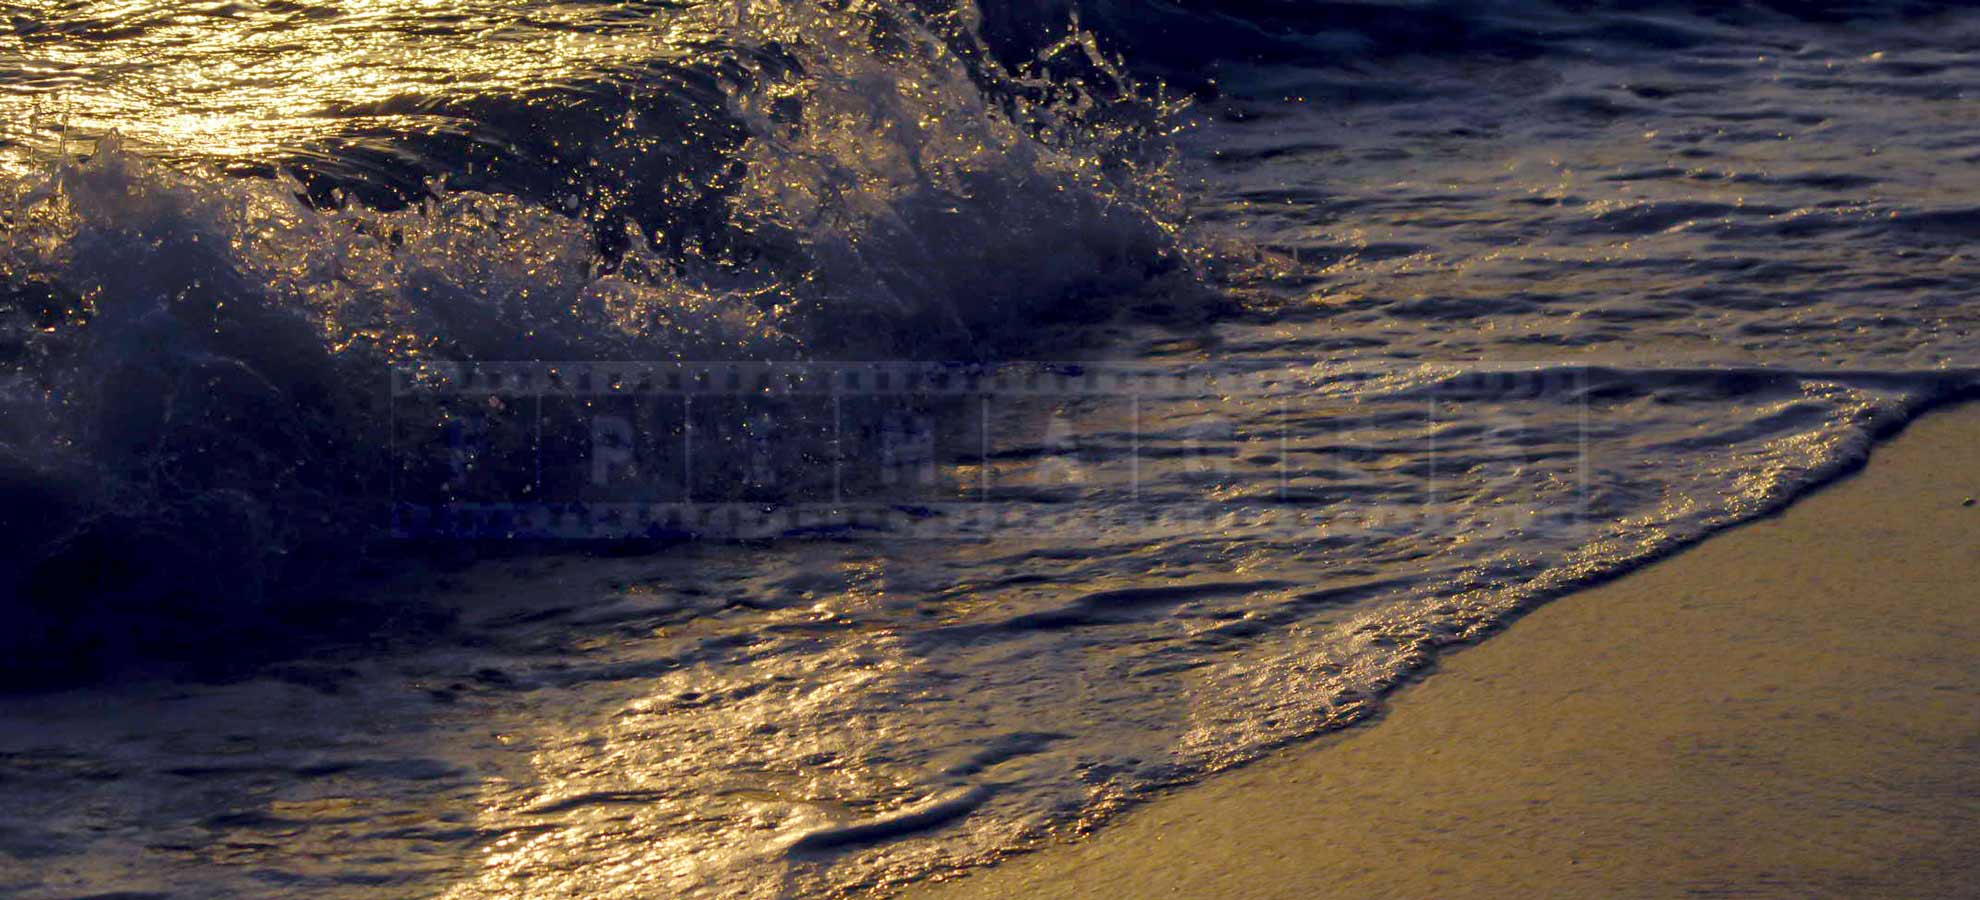 waves rolling onto the beach at sunset